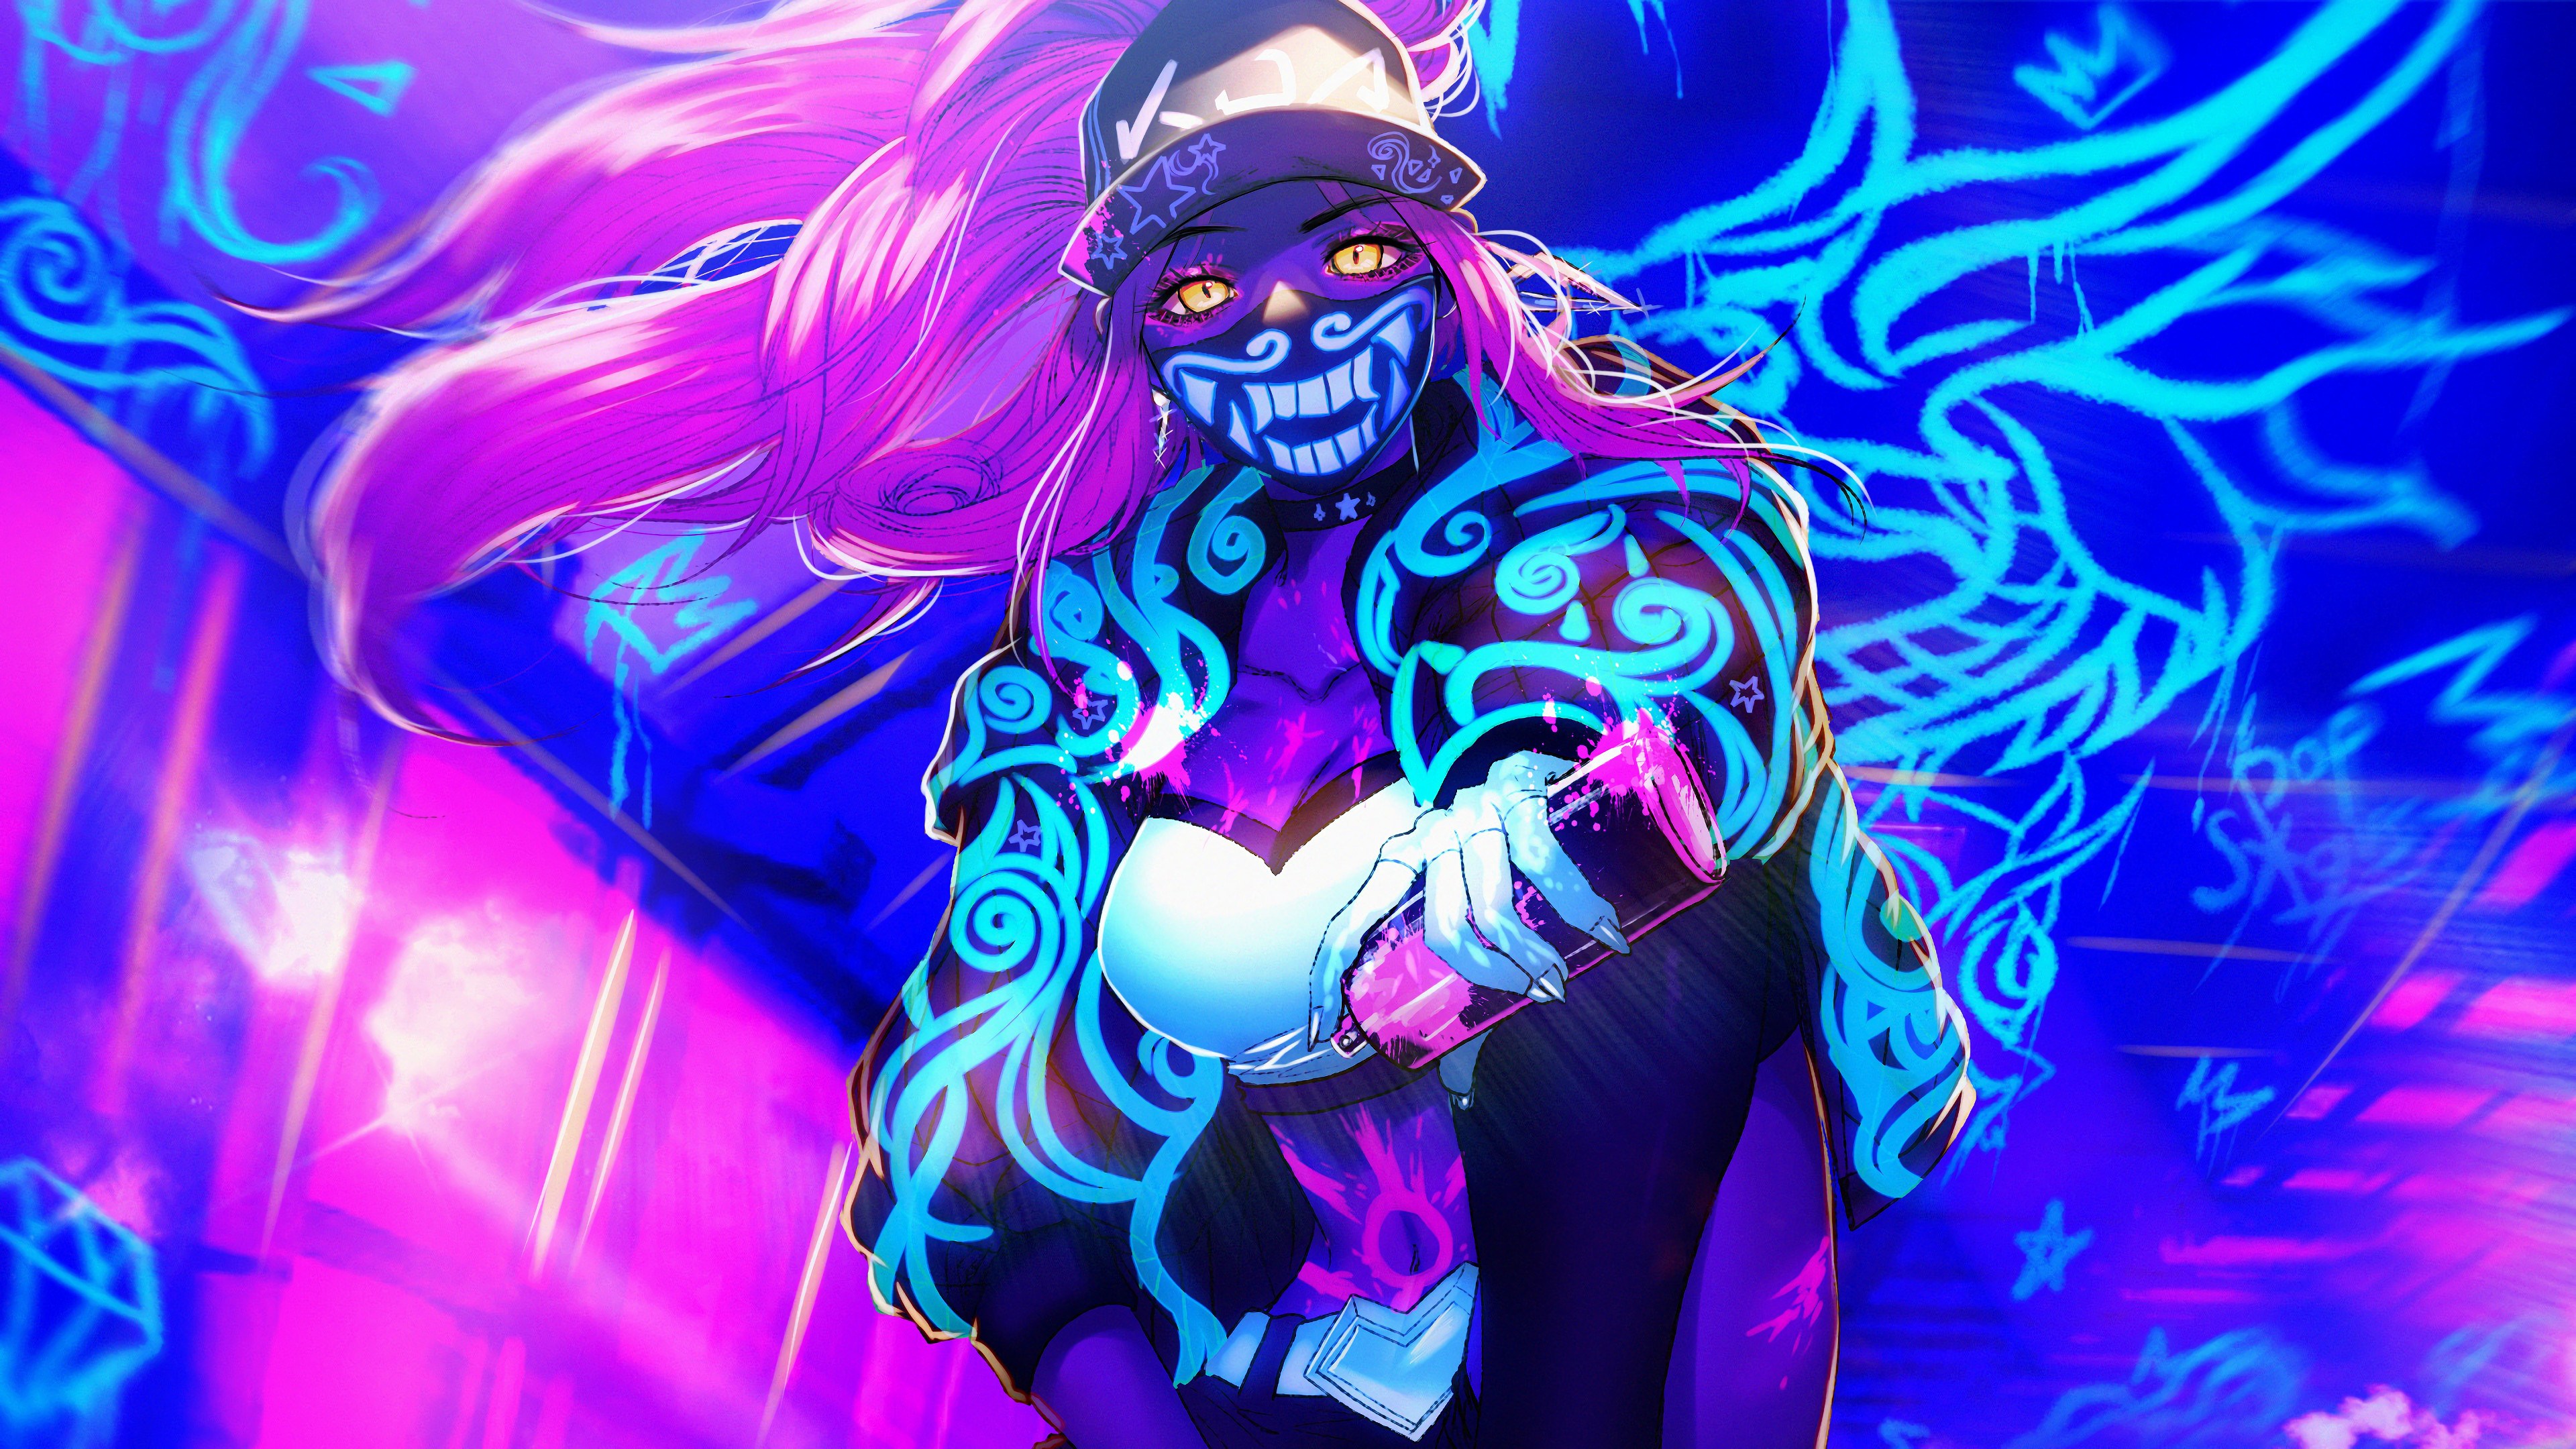 The Best and Most Comprehensive League Of Legends Wallpaper 4k Kda